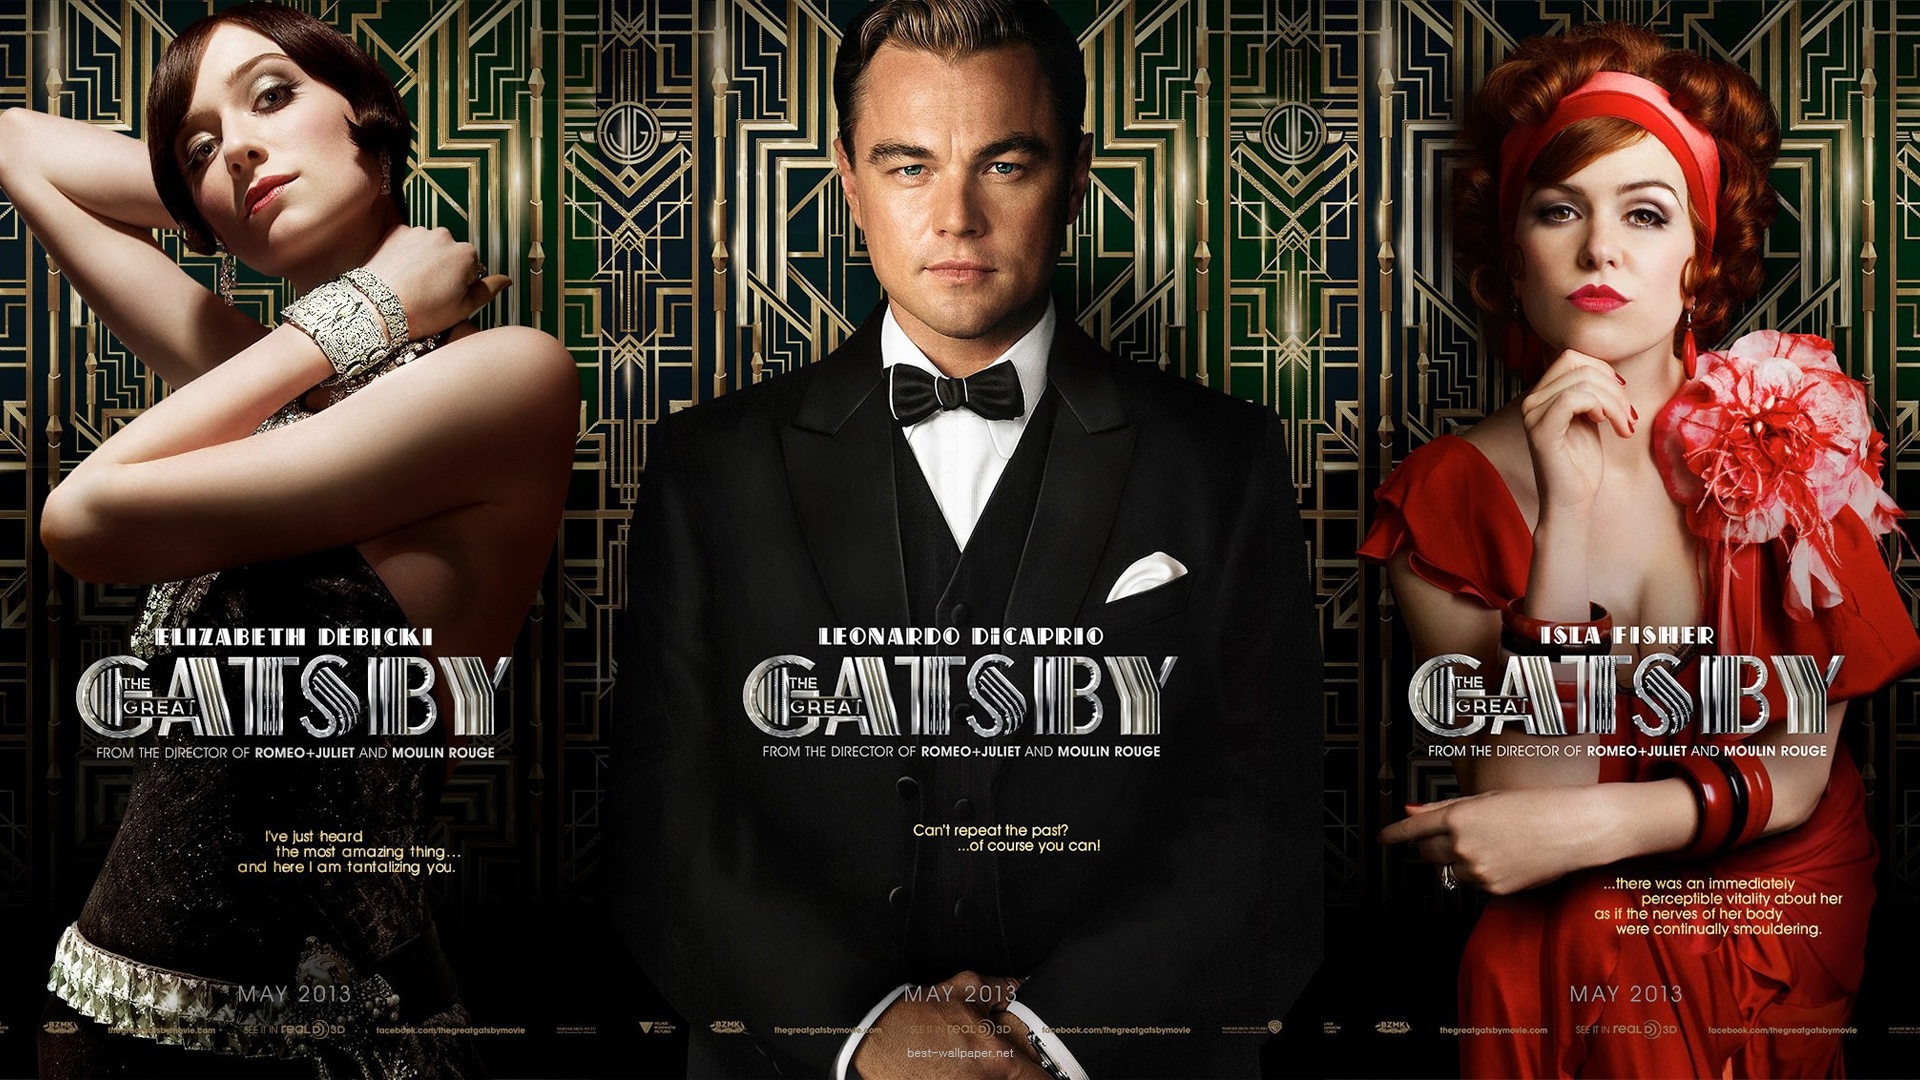 Download The Great Gatsby Movie